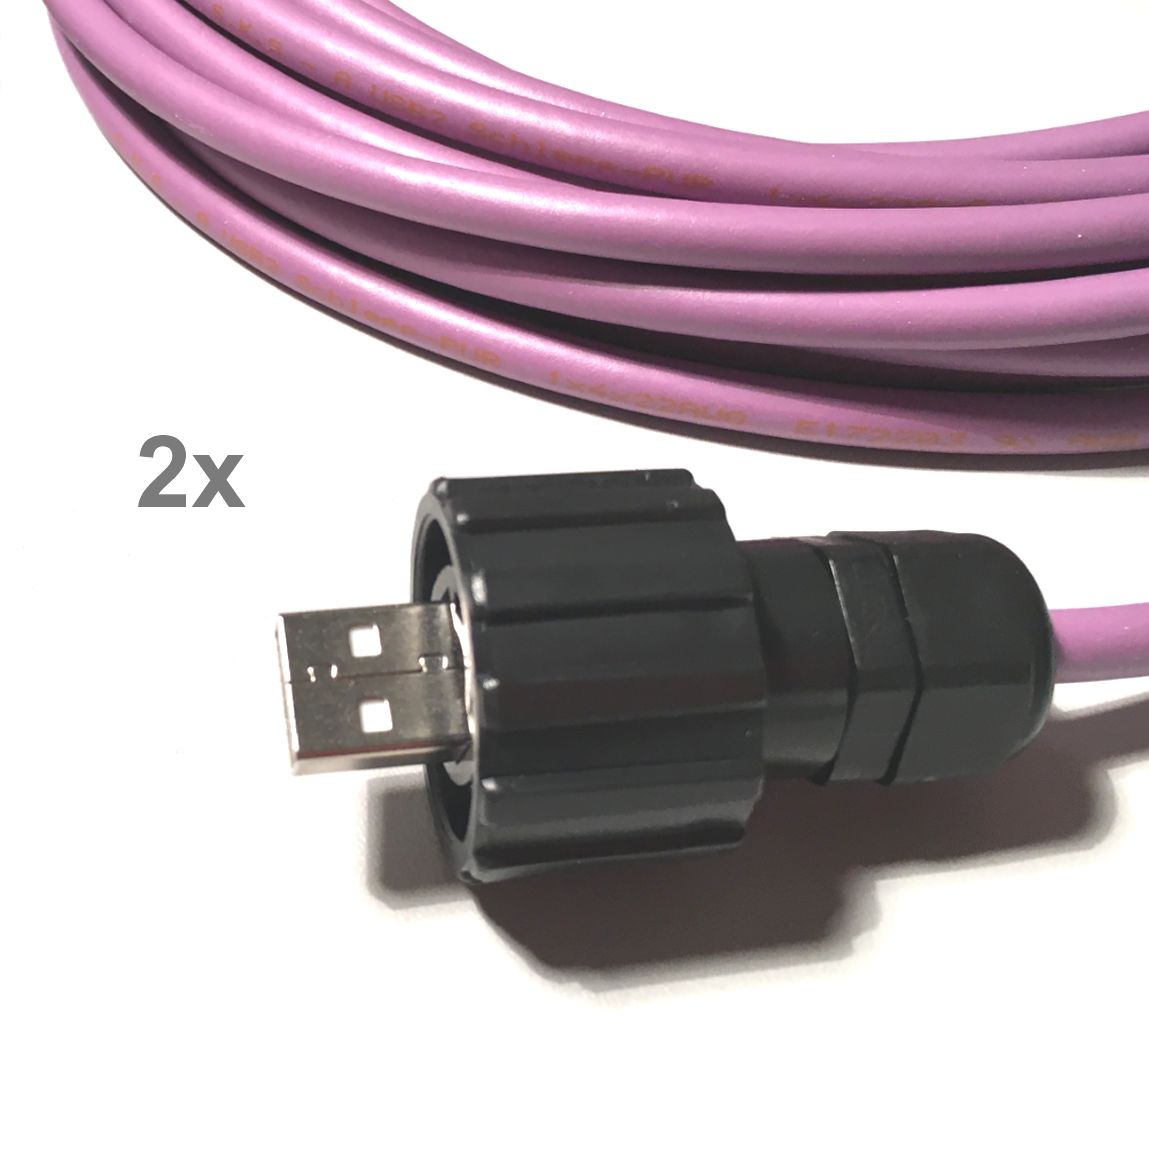 USB 2.0 PUR cable for industry + drag chains, 2x plug CONEC A IP67, 5m